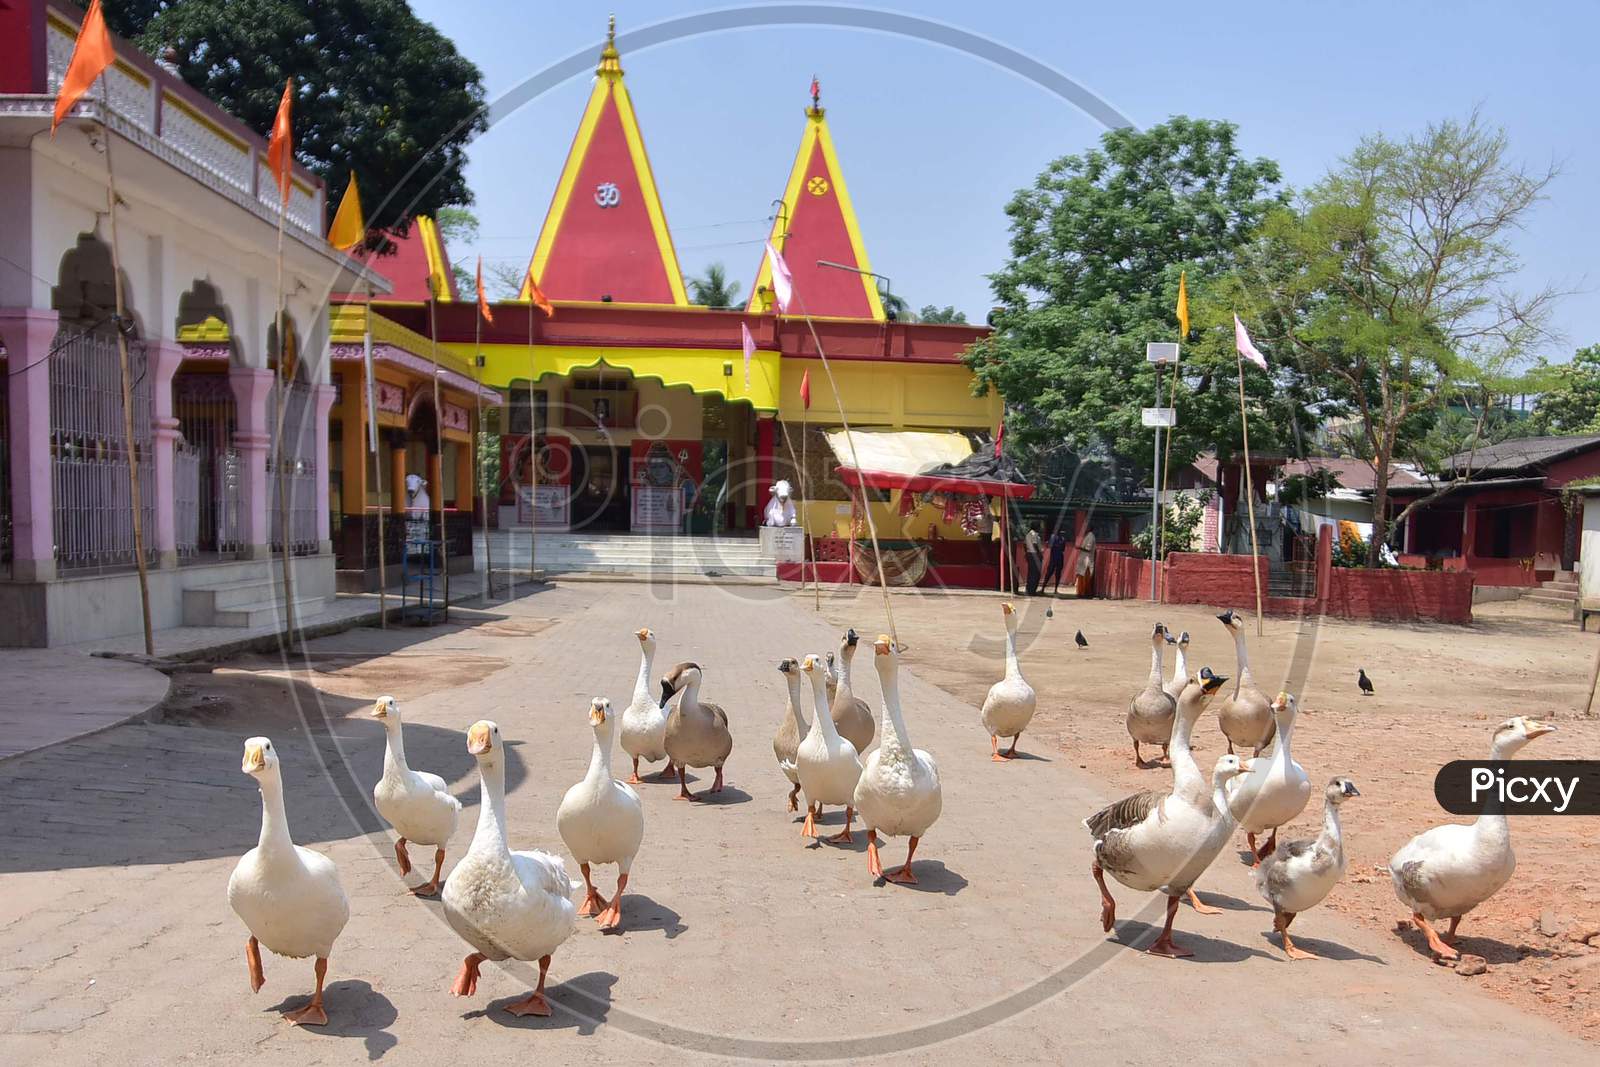 A Flock Of Geese Seen At A Temple During Nationwide Lockdown, As A Preventive Measure Against The Covid-19 Coronavirus, In Nagaon District Of Assam On April 03,2020.